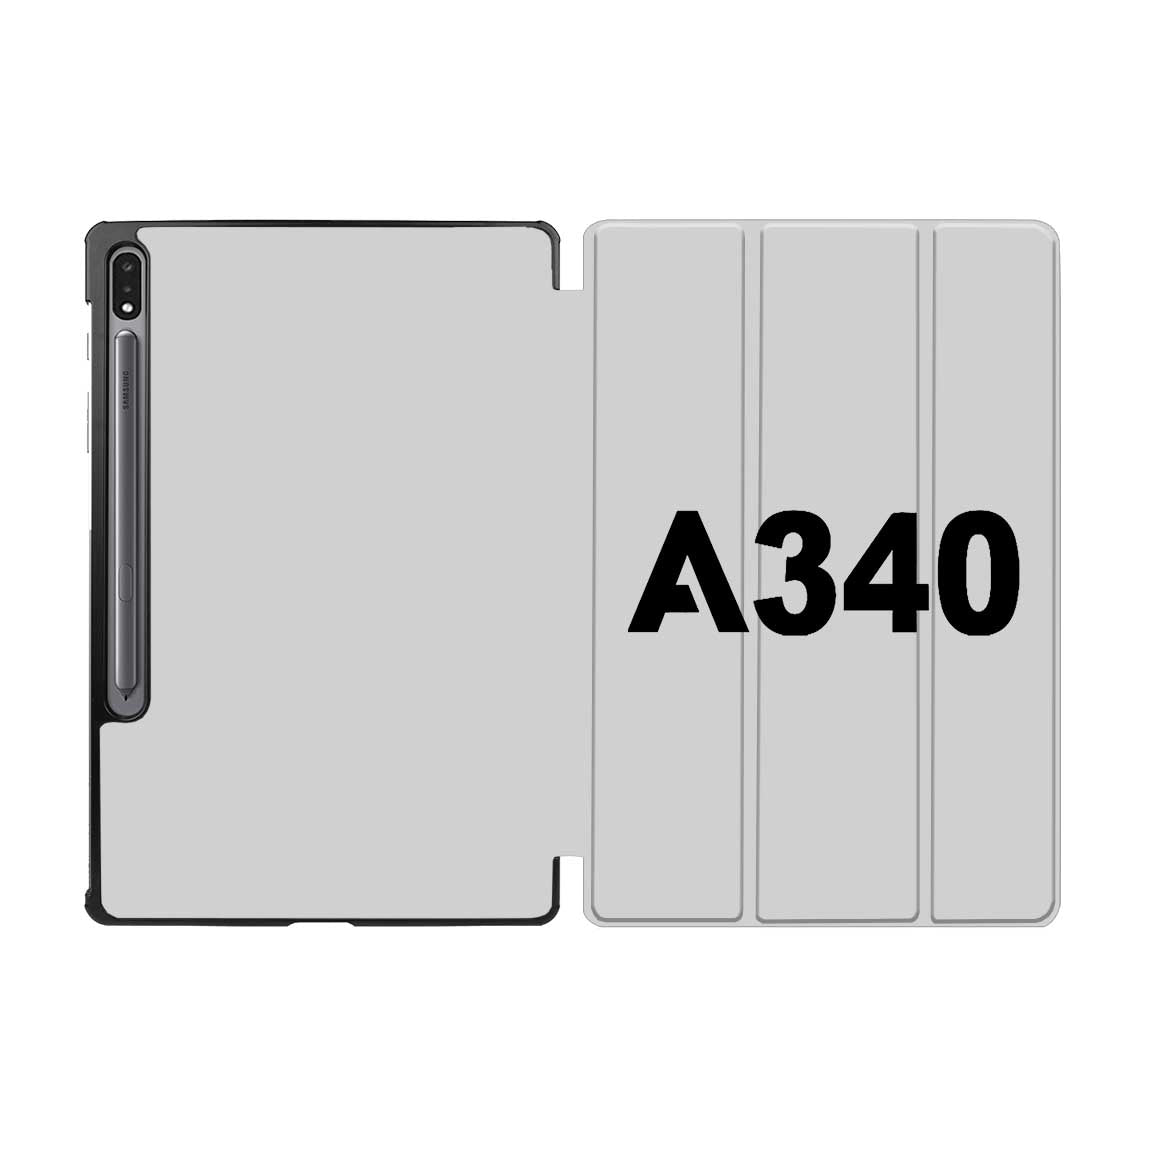 A340 Flat Text Designed Samsung Tablet Cases